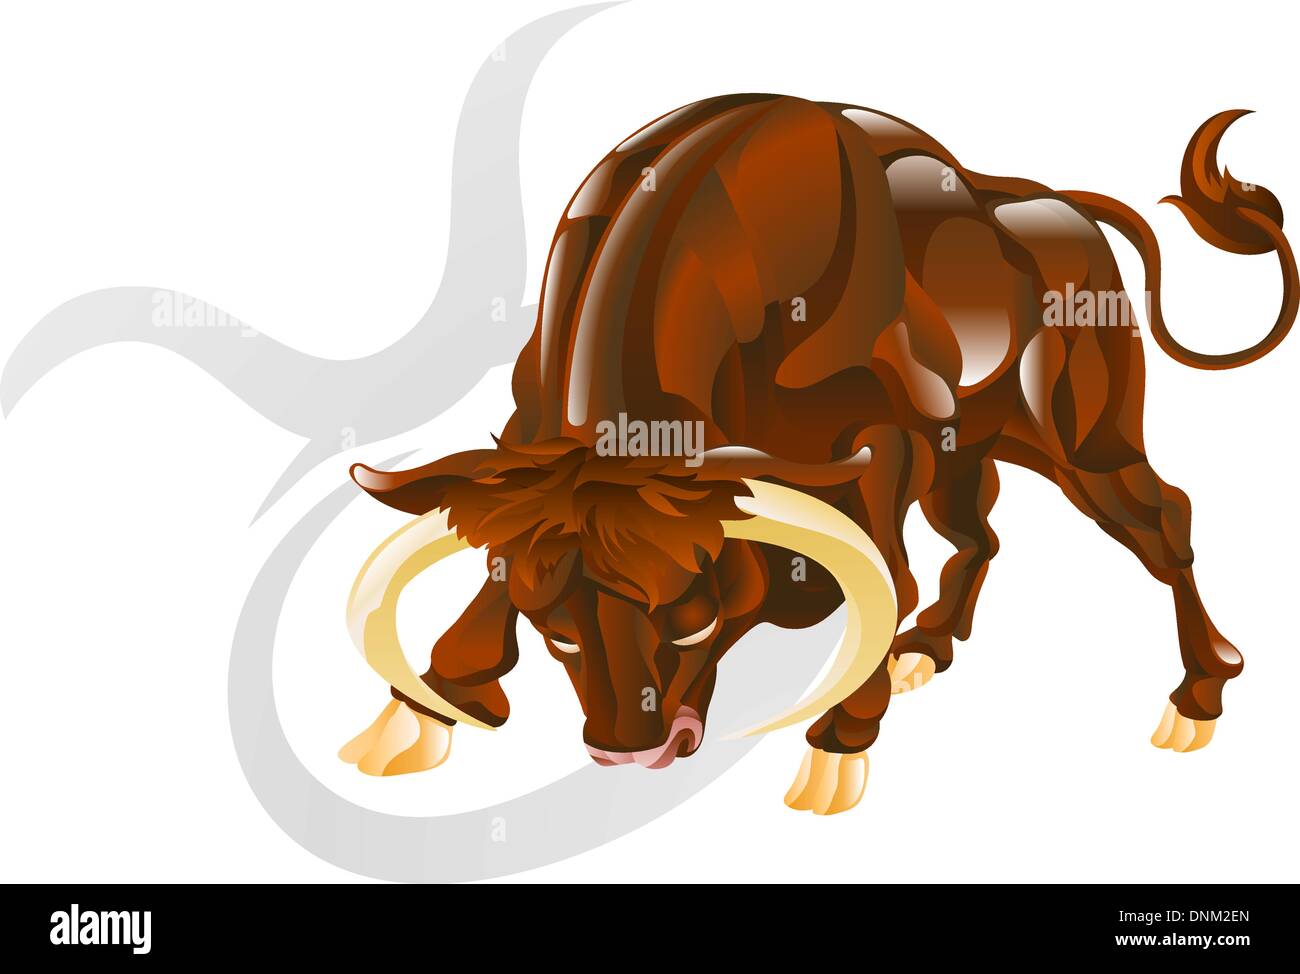 Illustration representing Taurus the bull star or birth sign. Includes the symbol or icon in the background Stock Vector